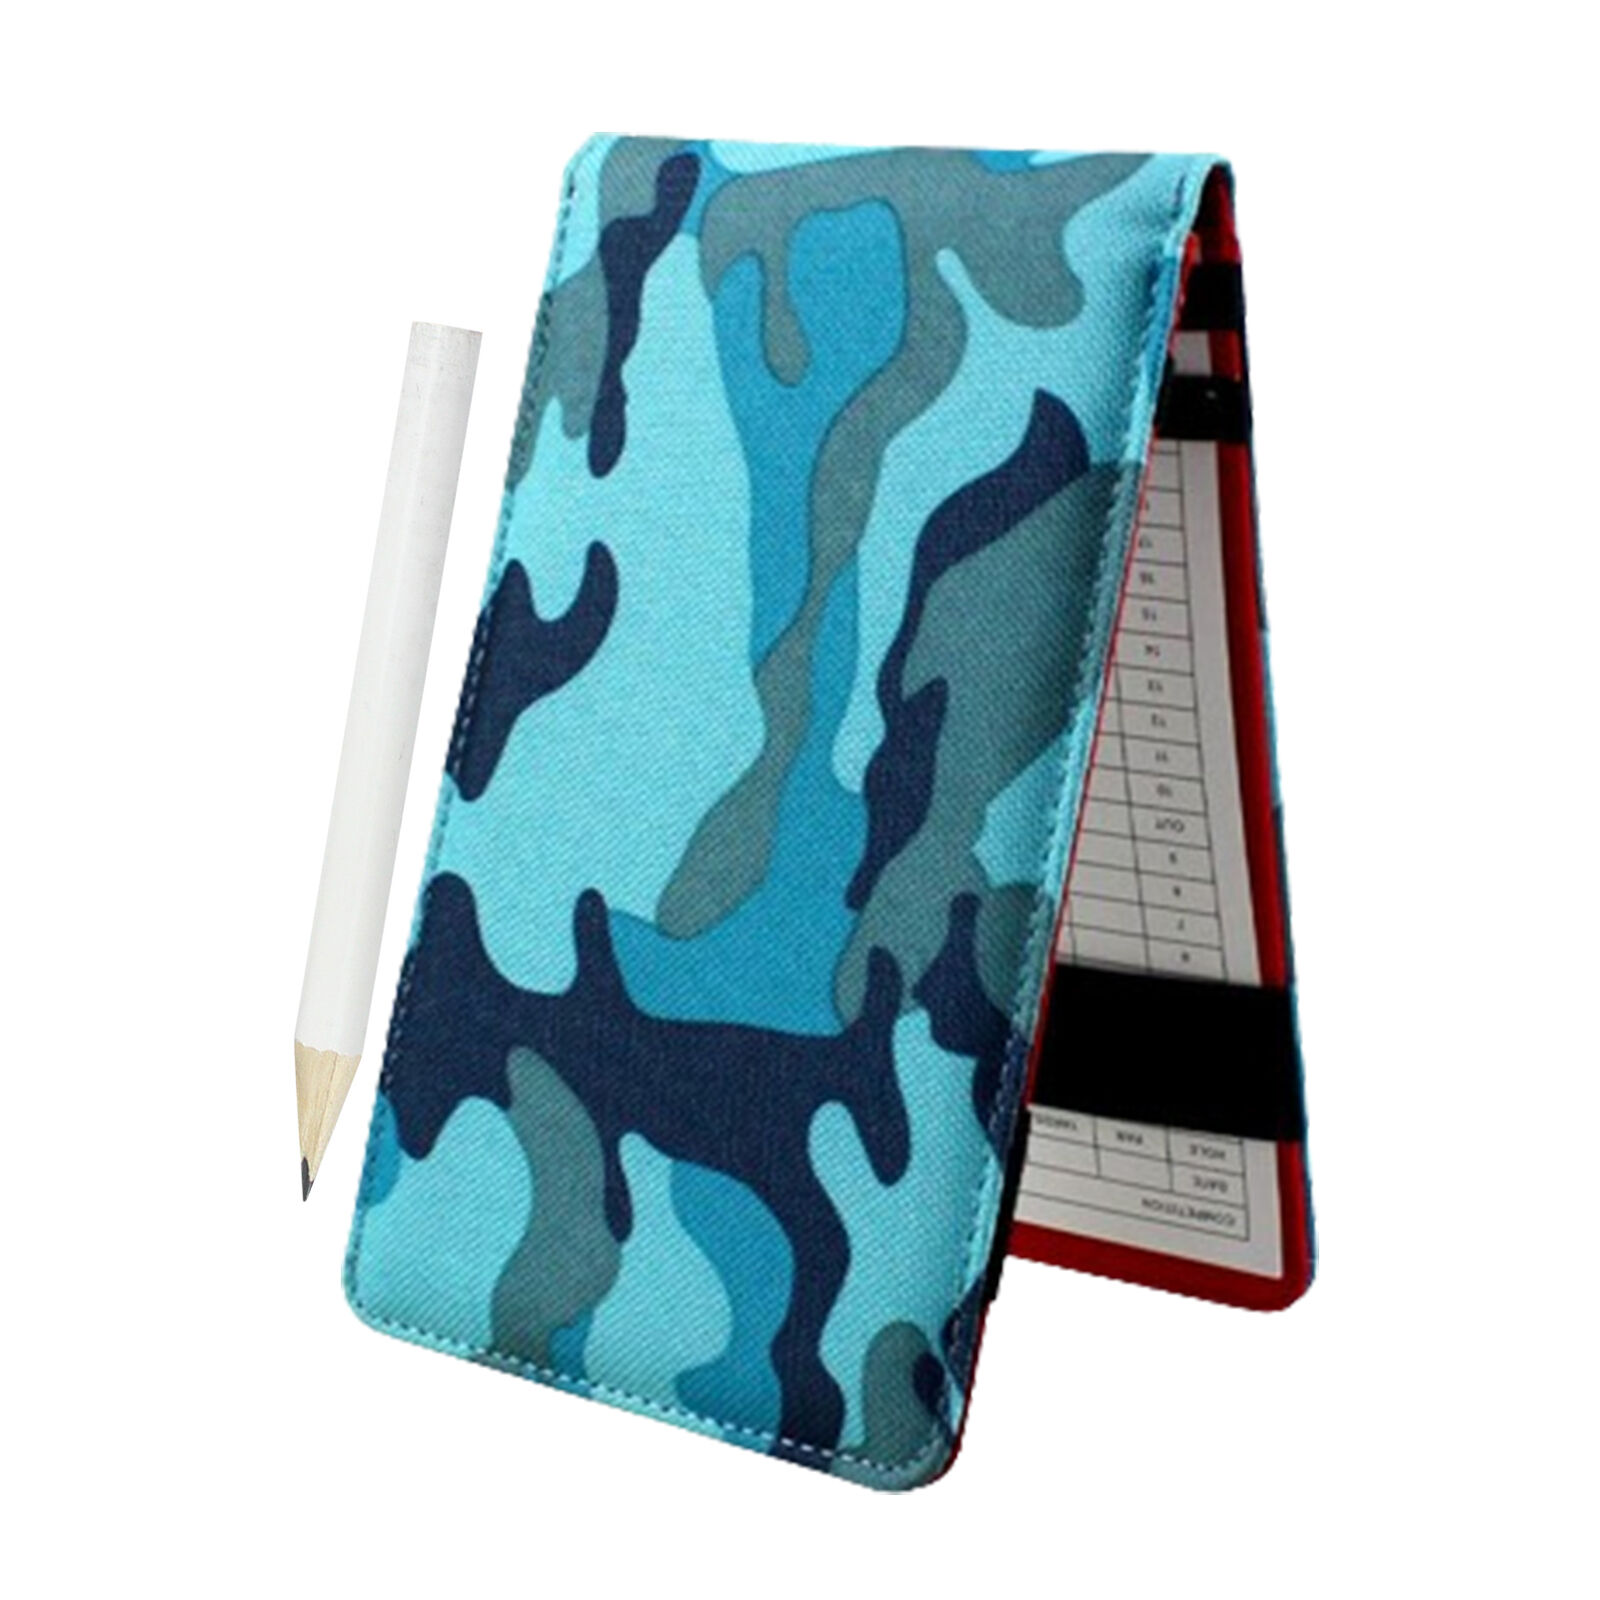 Golf Score Book Golf Journal Notebook with Pencil Oxford Cloth Club capable Unbranded does not apply - фотография #2